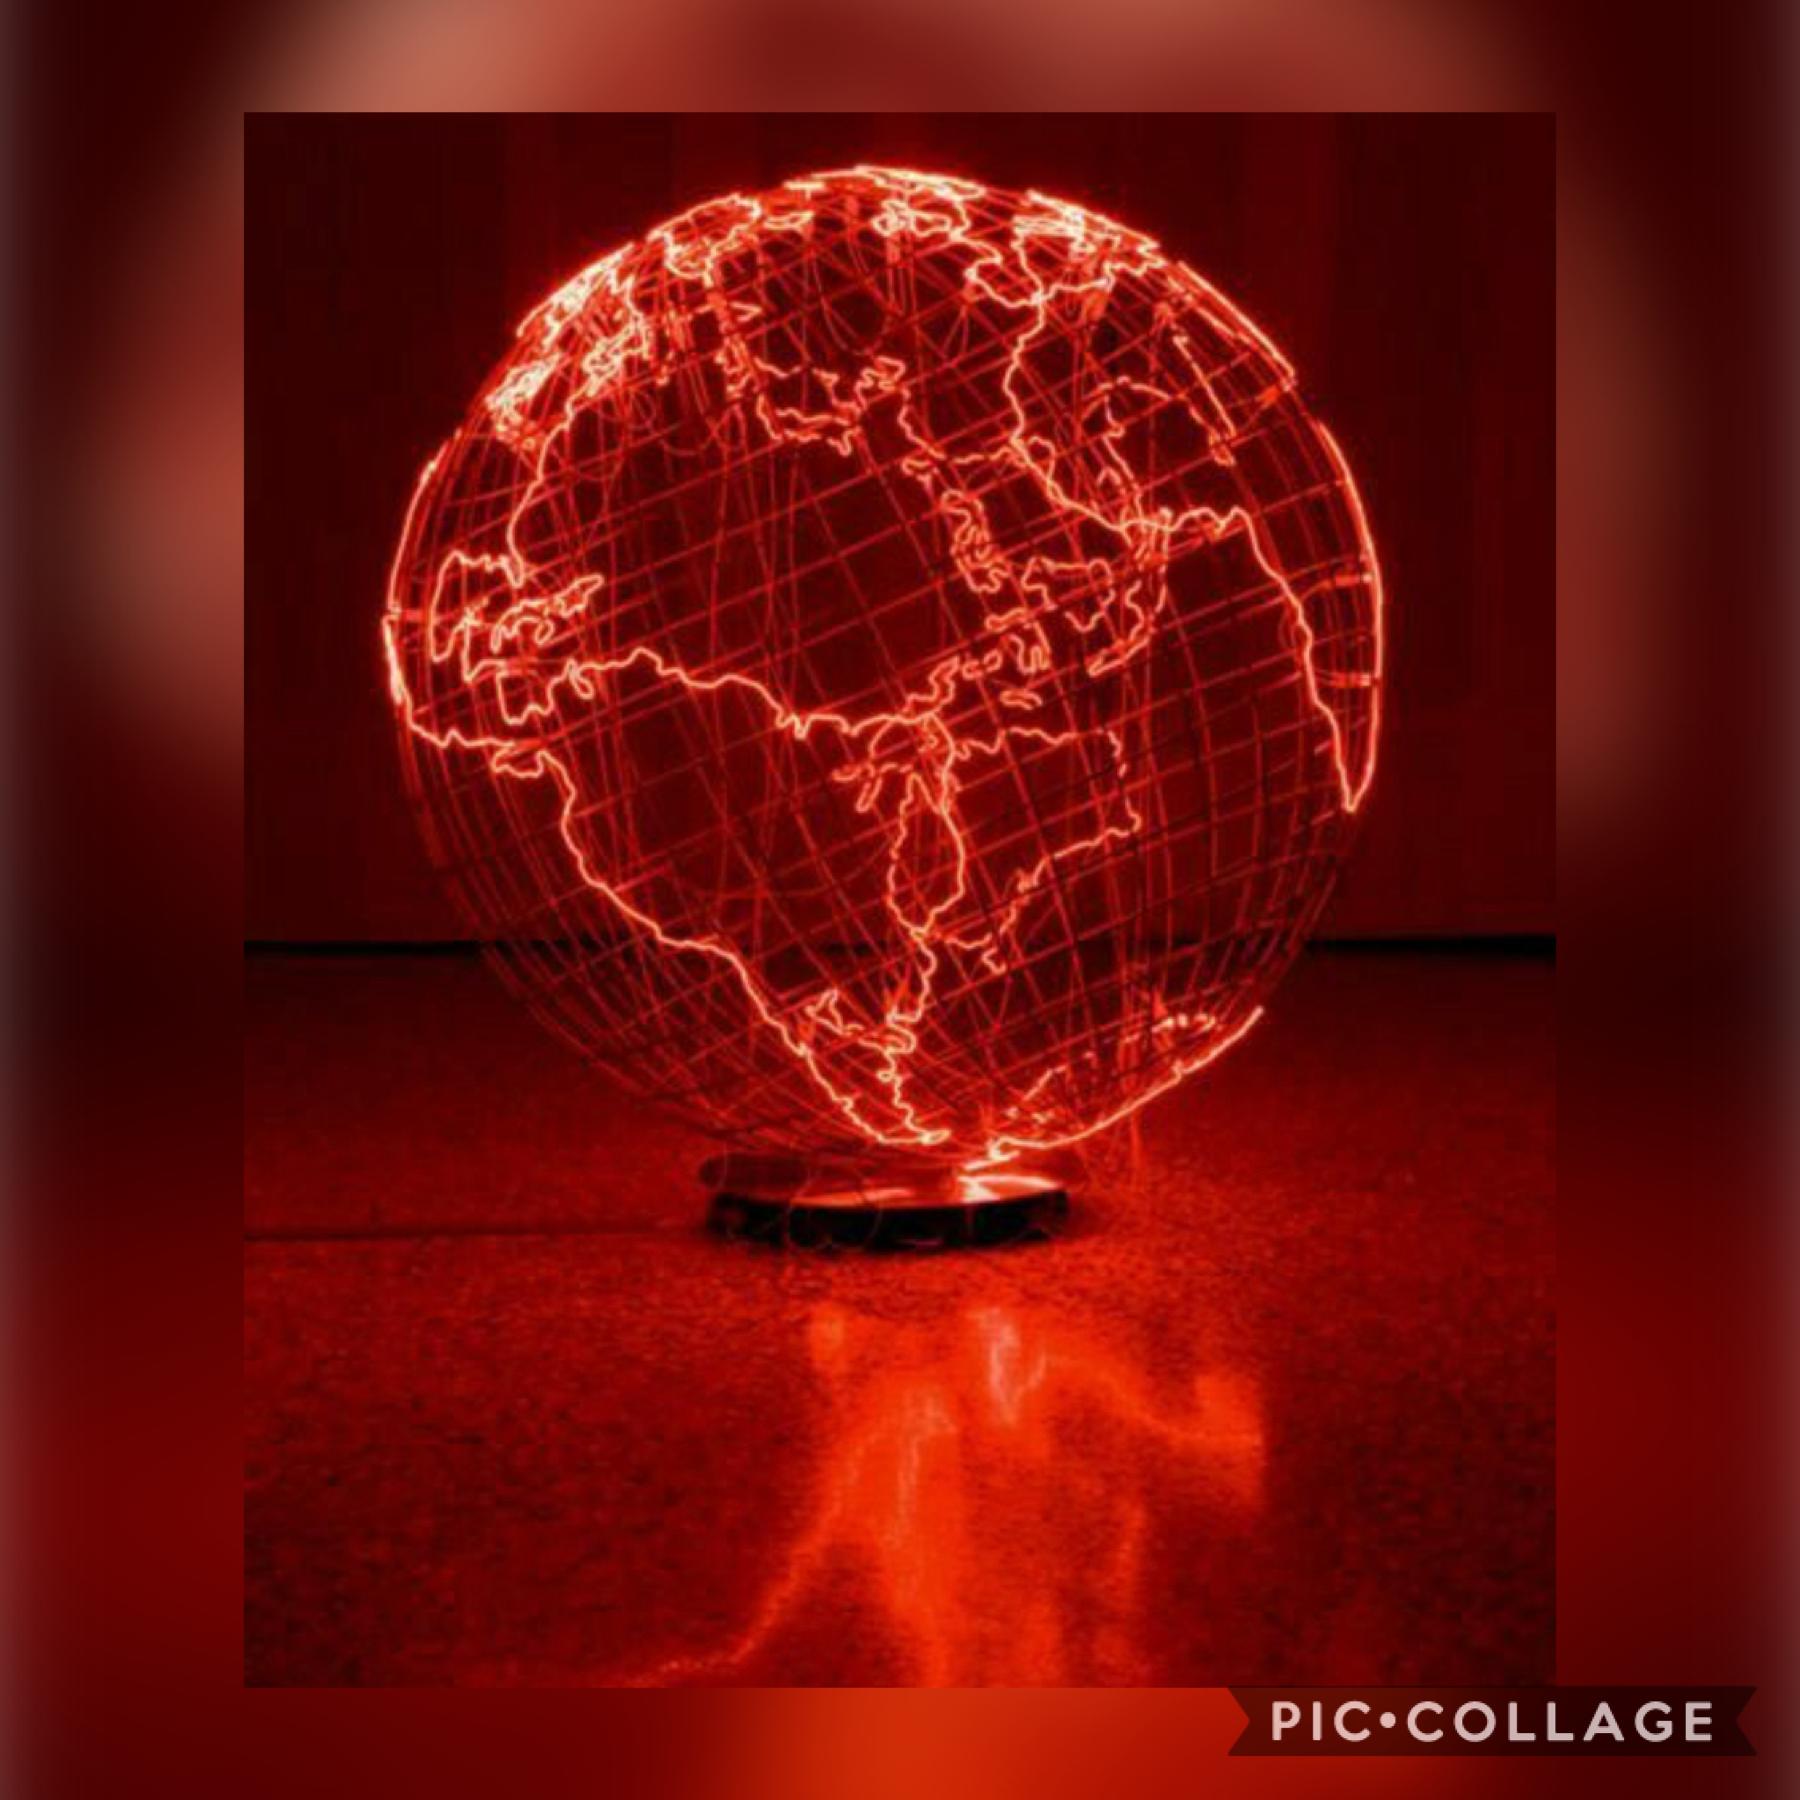 red asthetic 👇
i’m gonna post lots of colors comment ur favorite